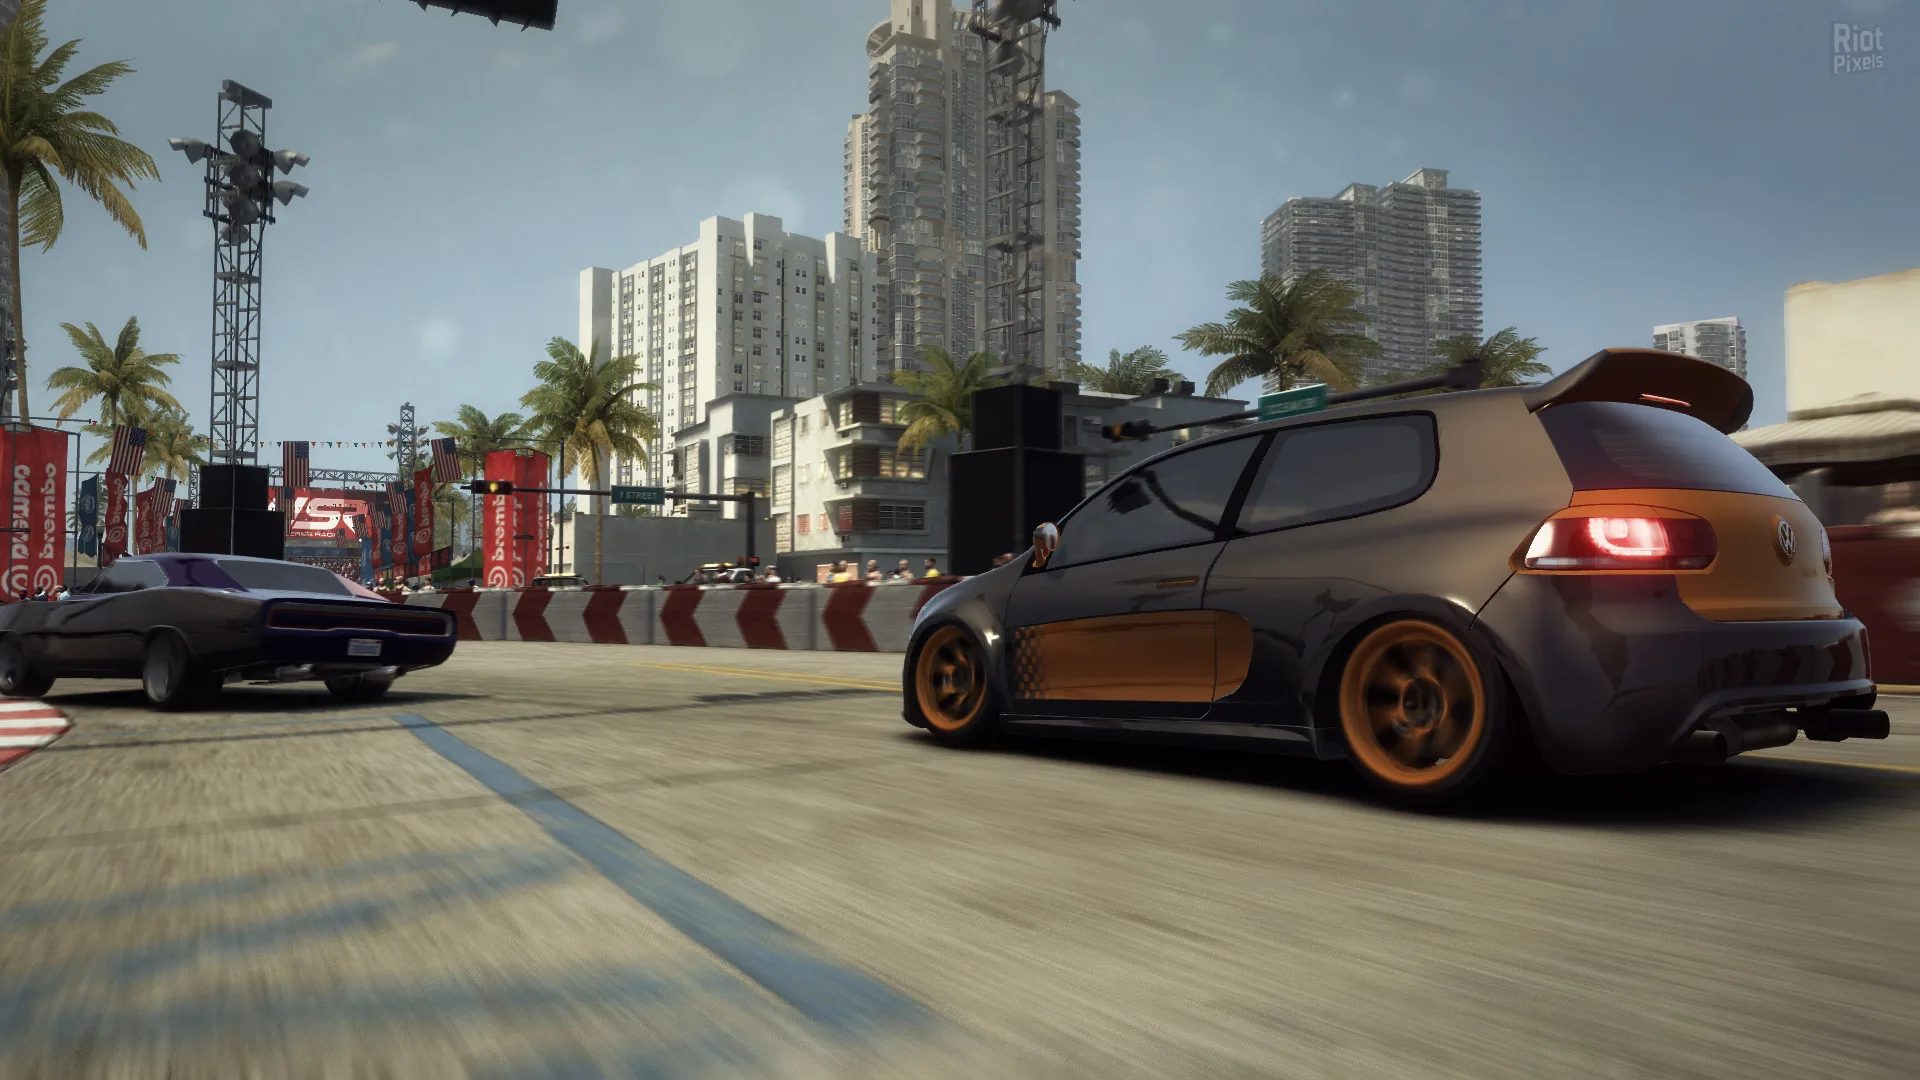 grid 2 reloaded edition download